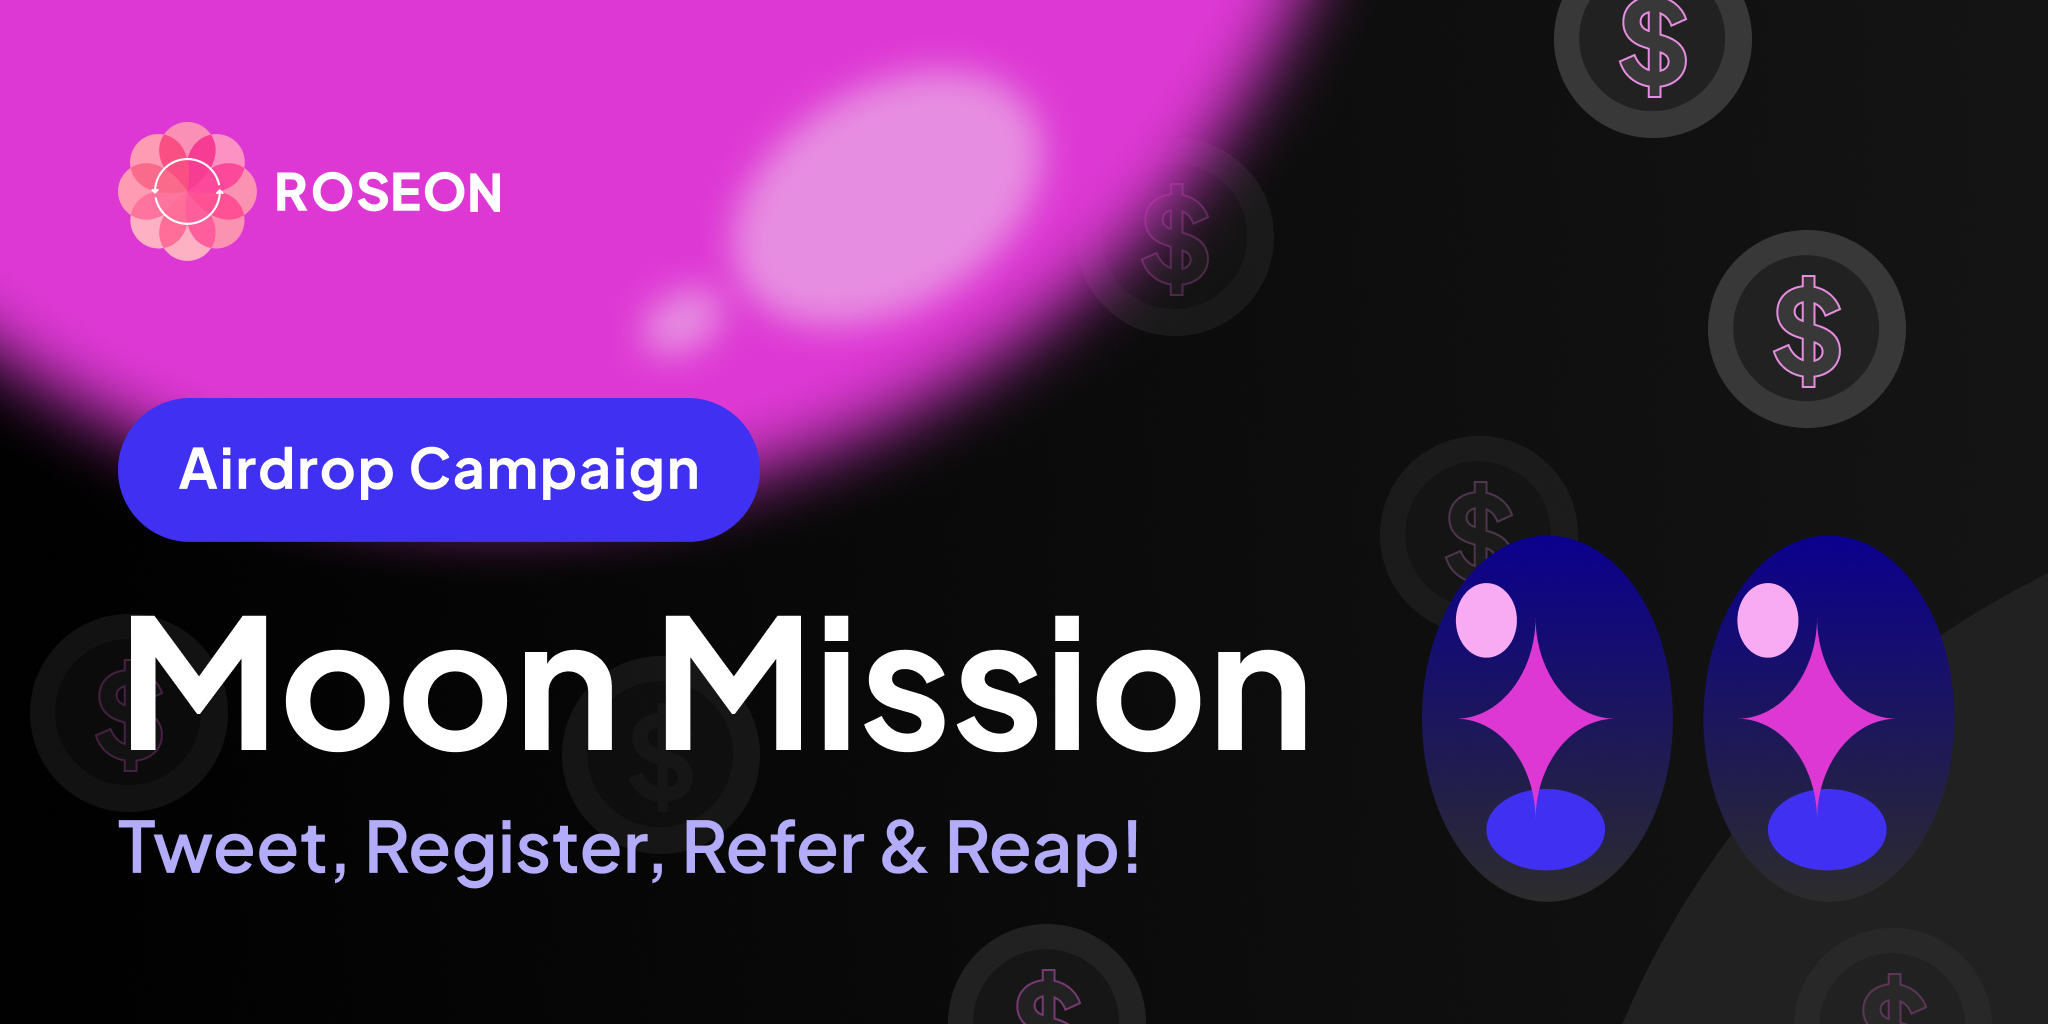 roseon-airdrop-moon-mission